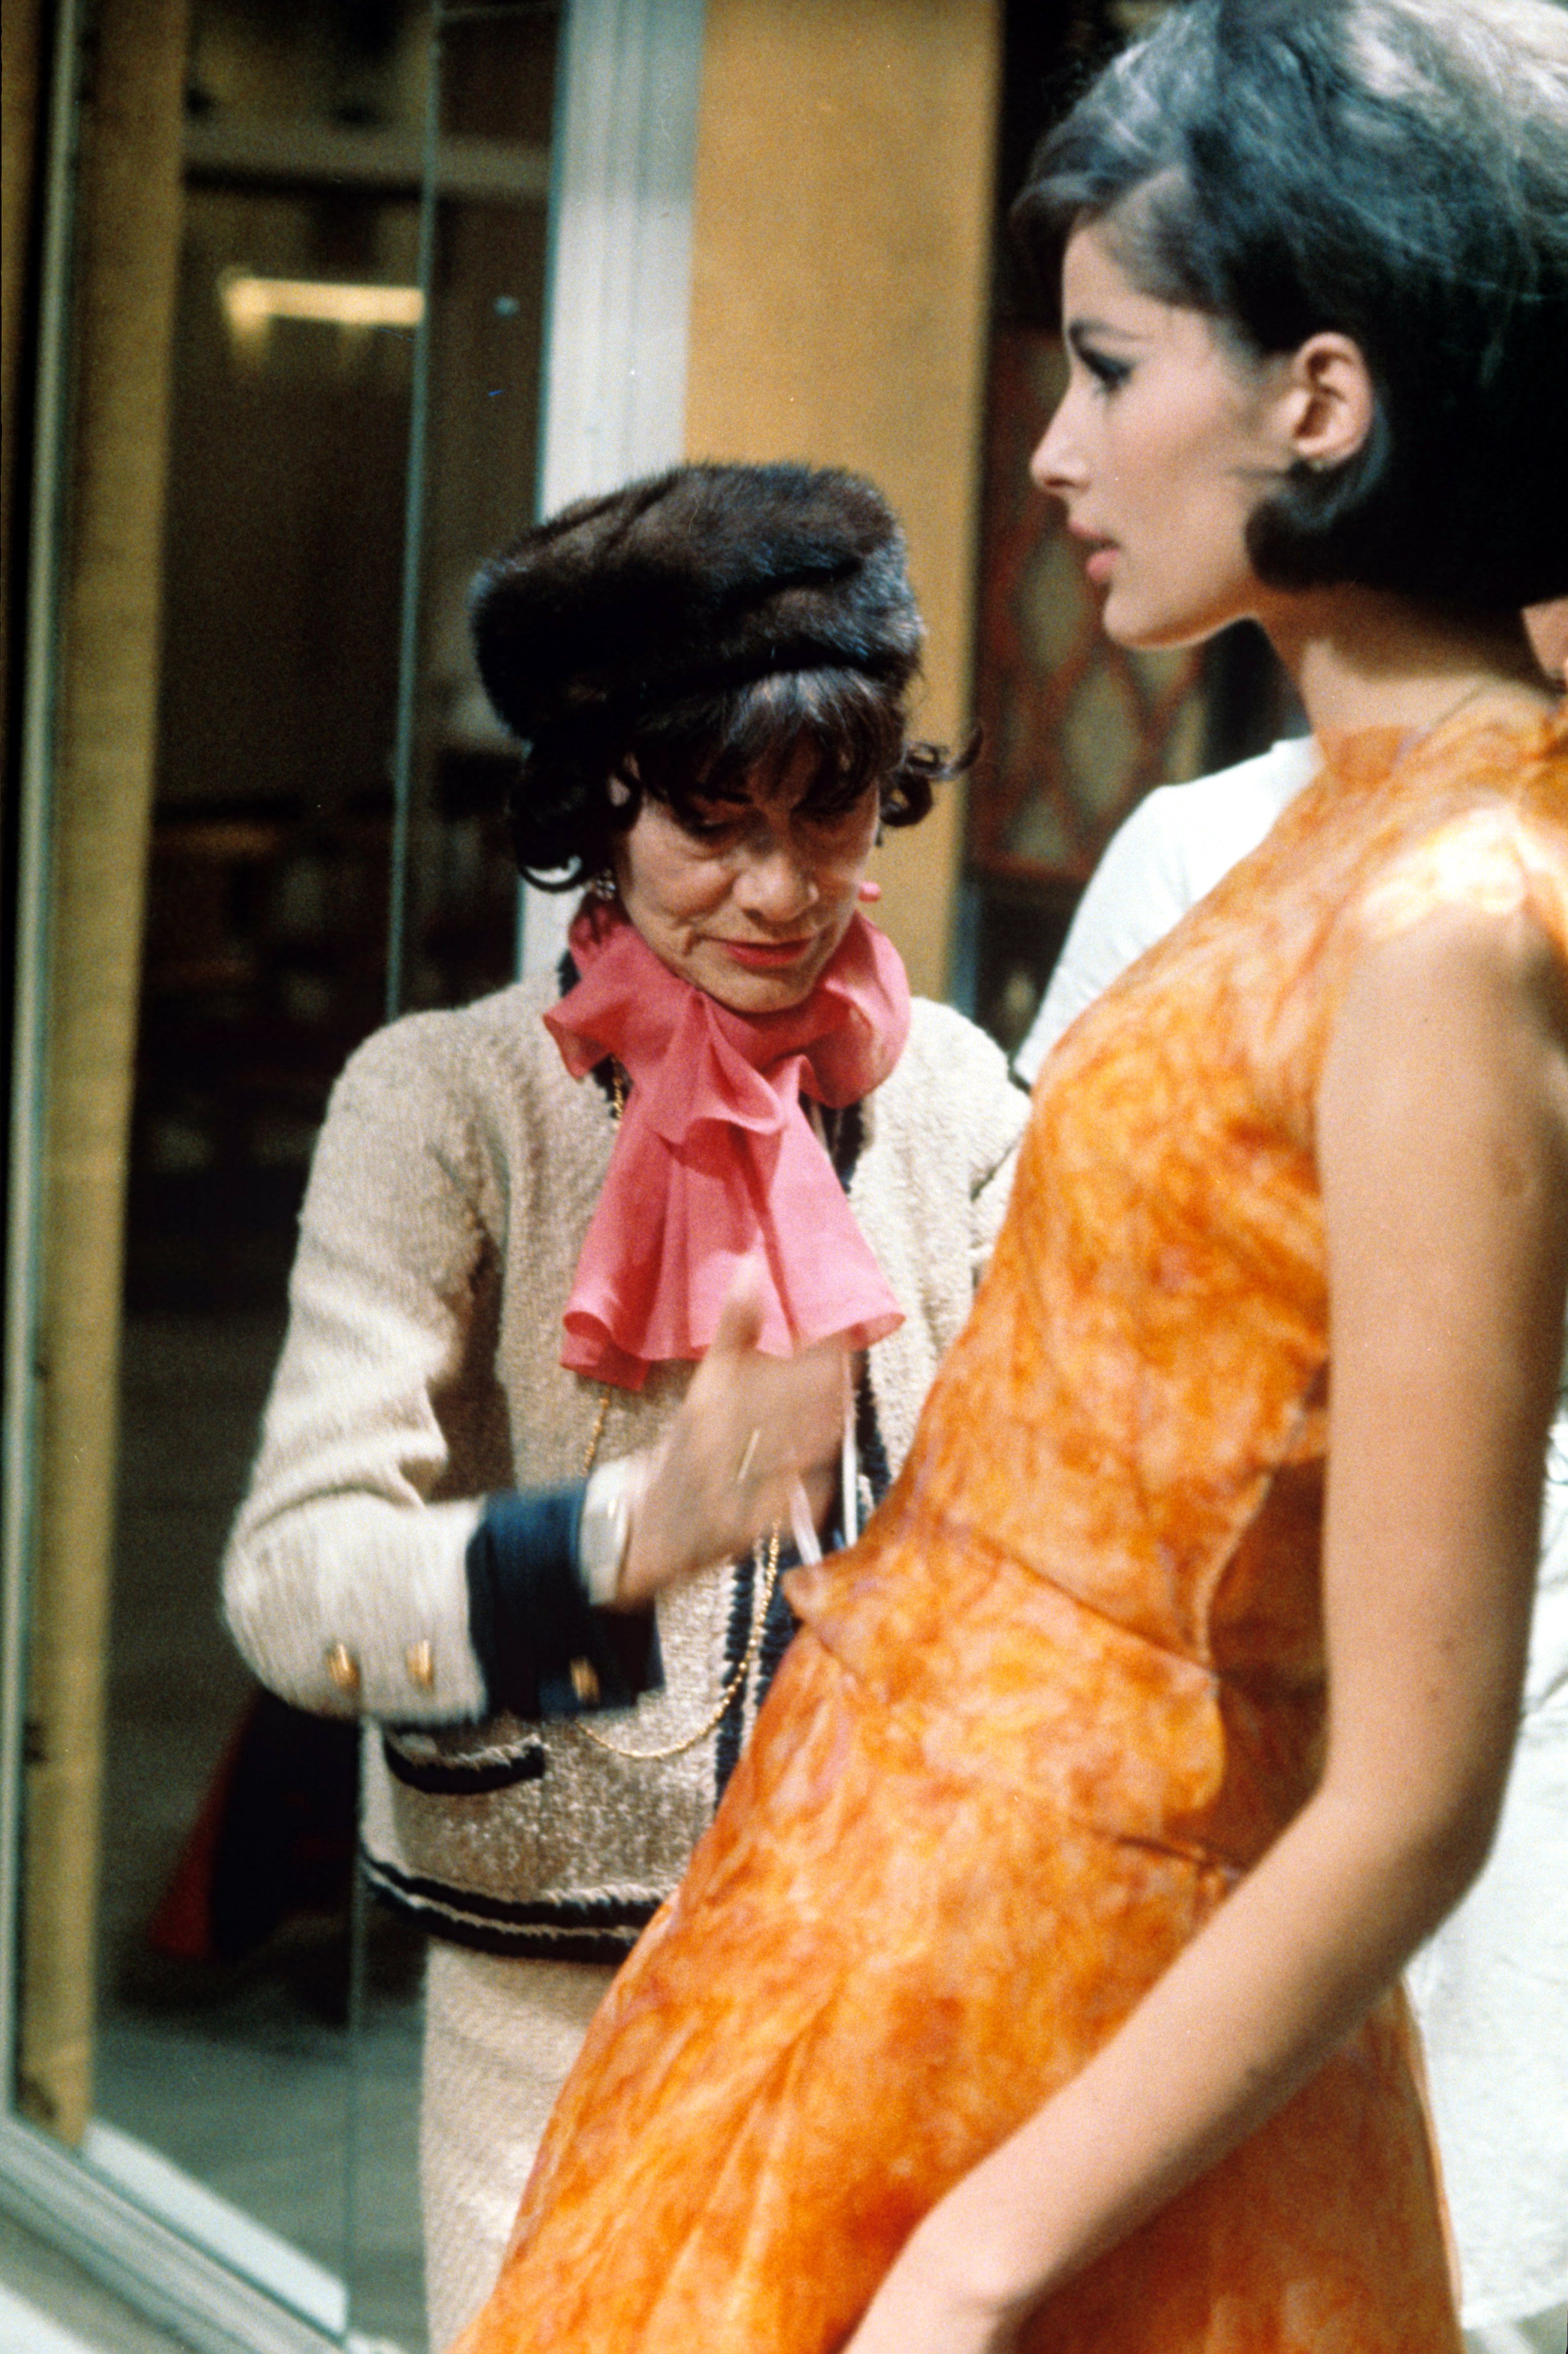 Chanel dresses a model following her fashion comeback in the Fifties